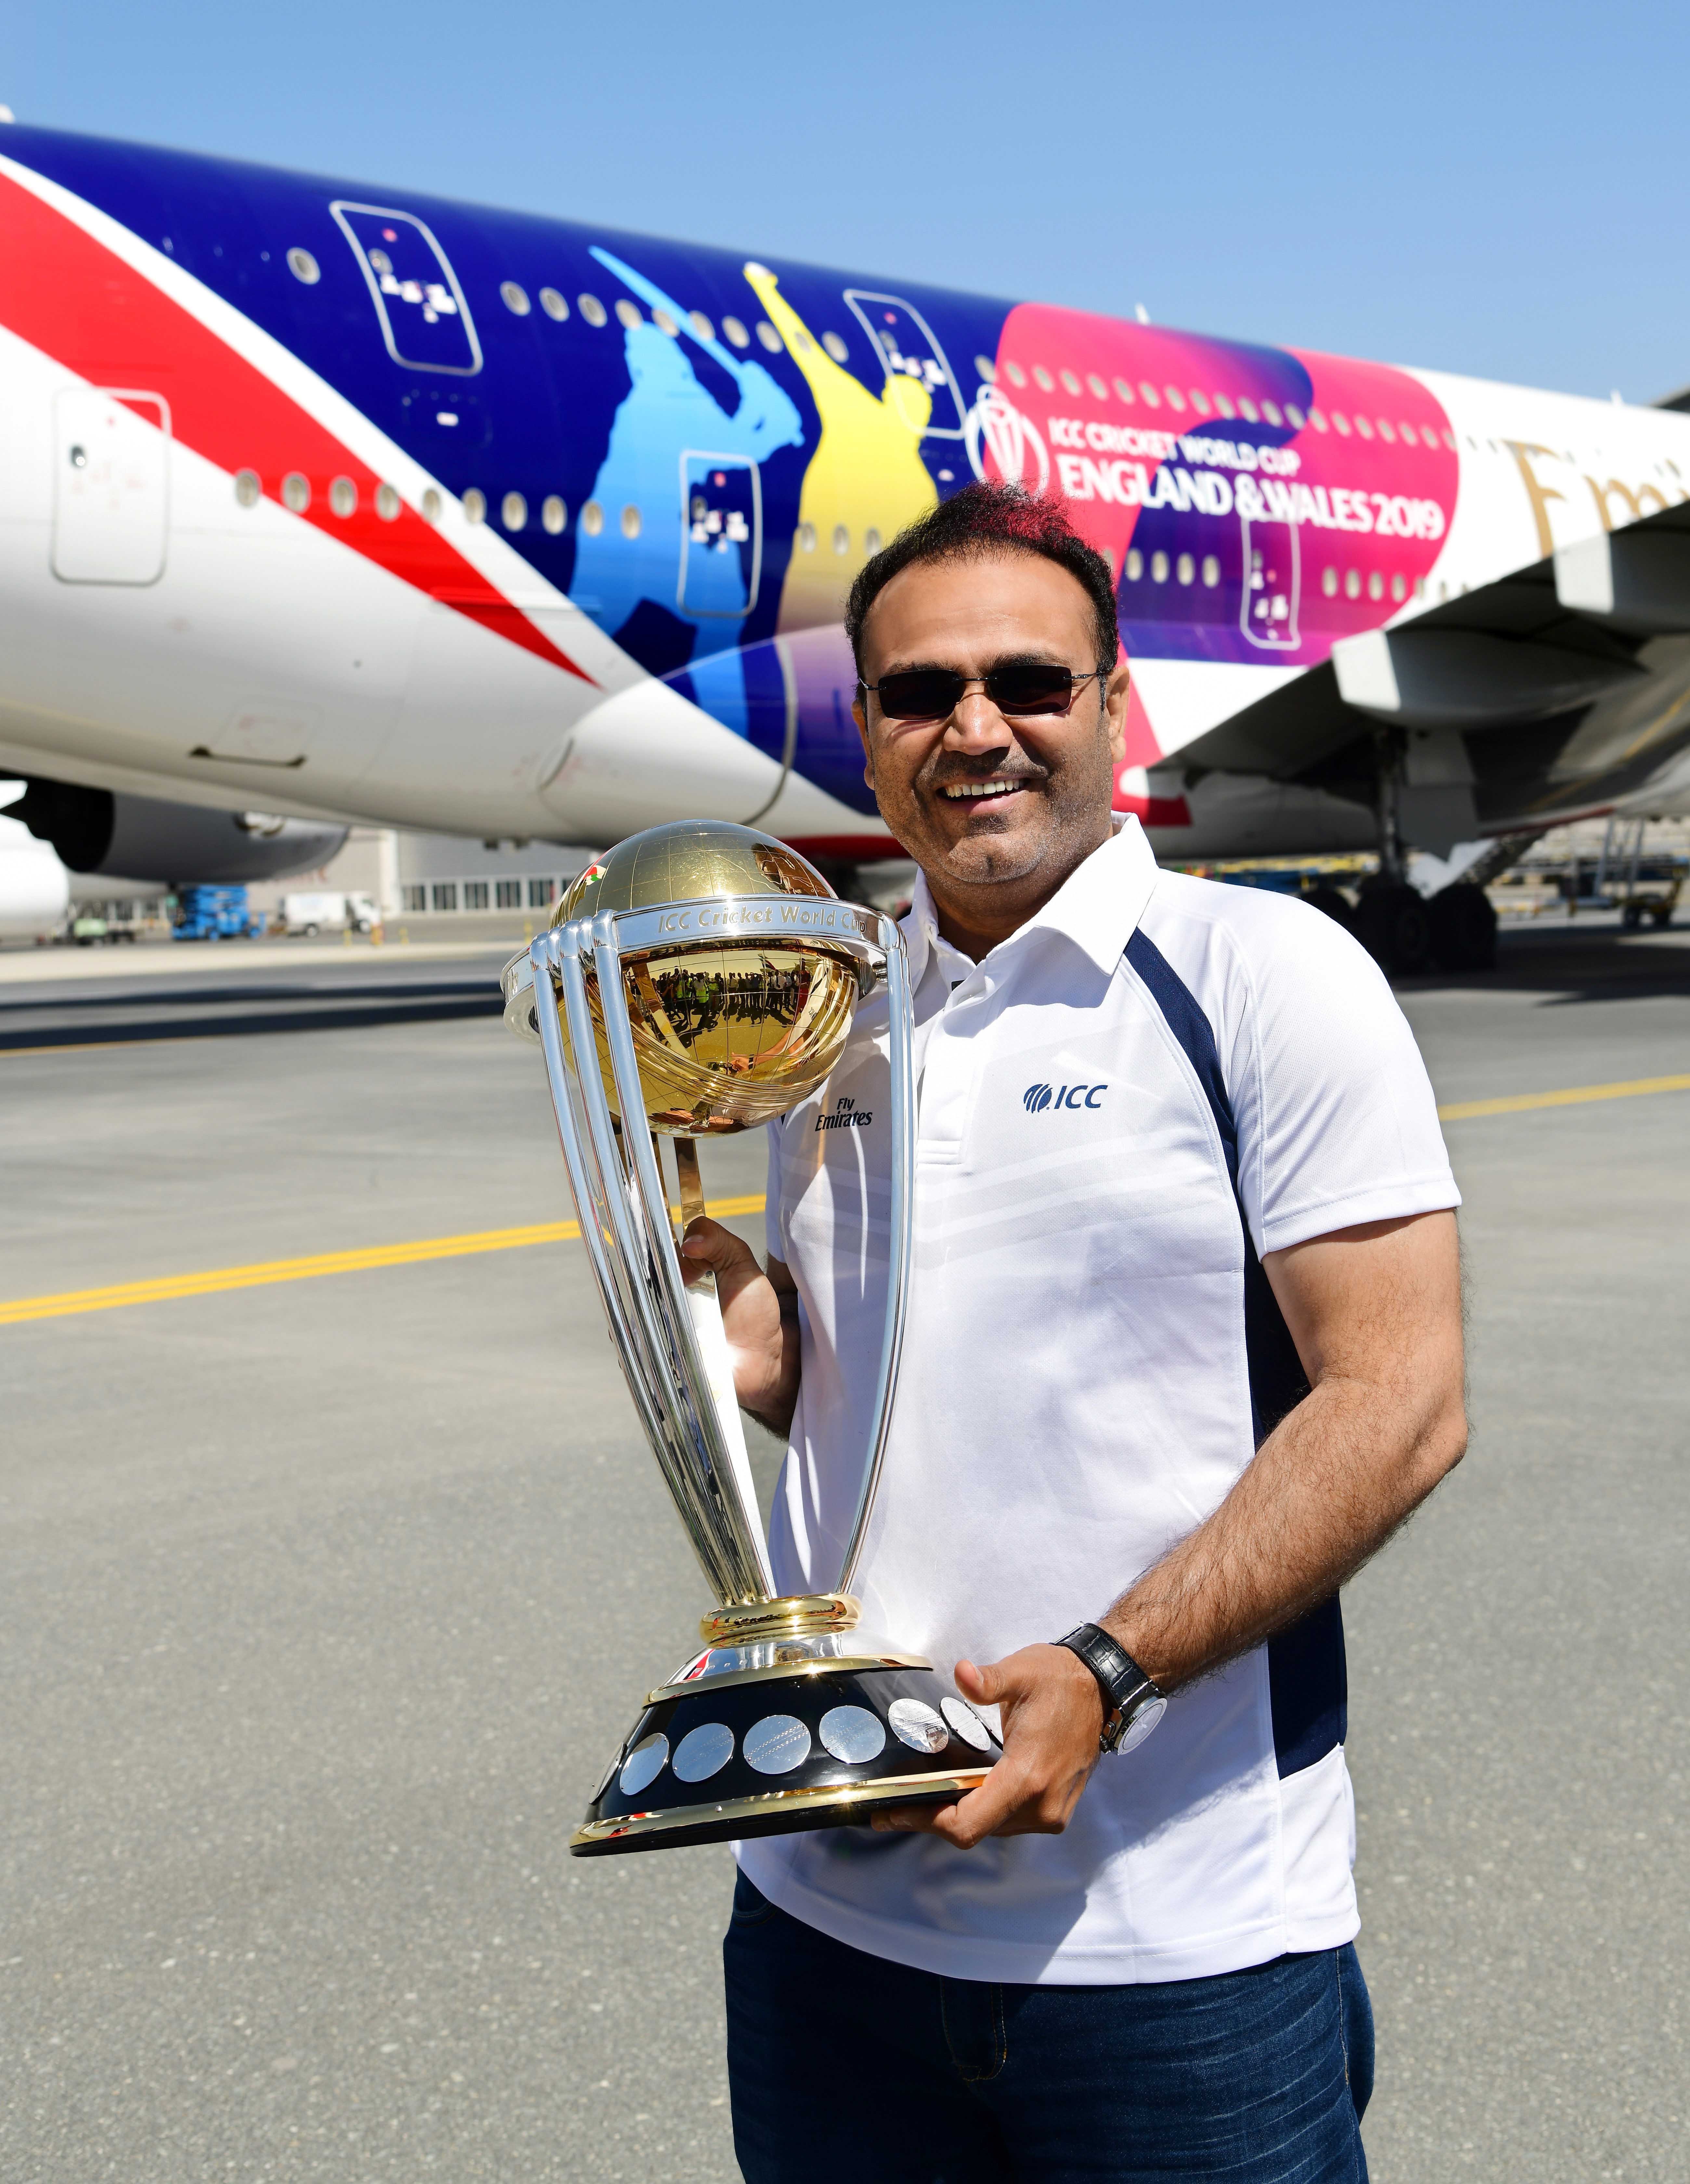  ICC Men’s Cricket World Cup 2011 winner, Virender Sehwag with the trophy.